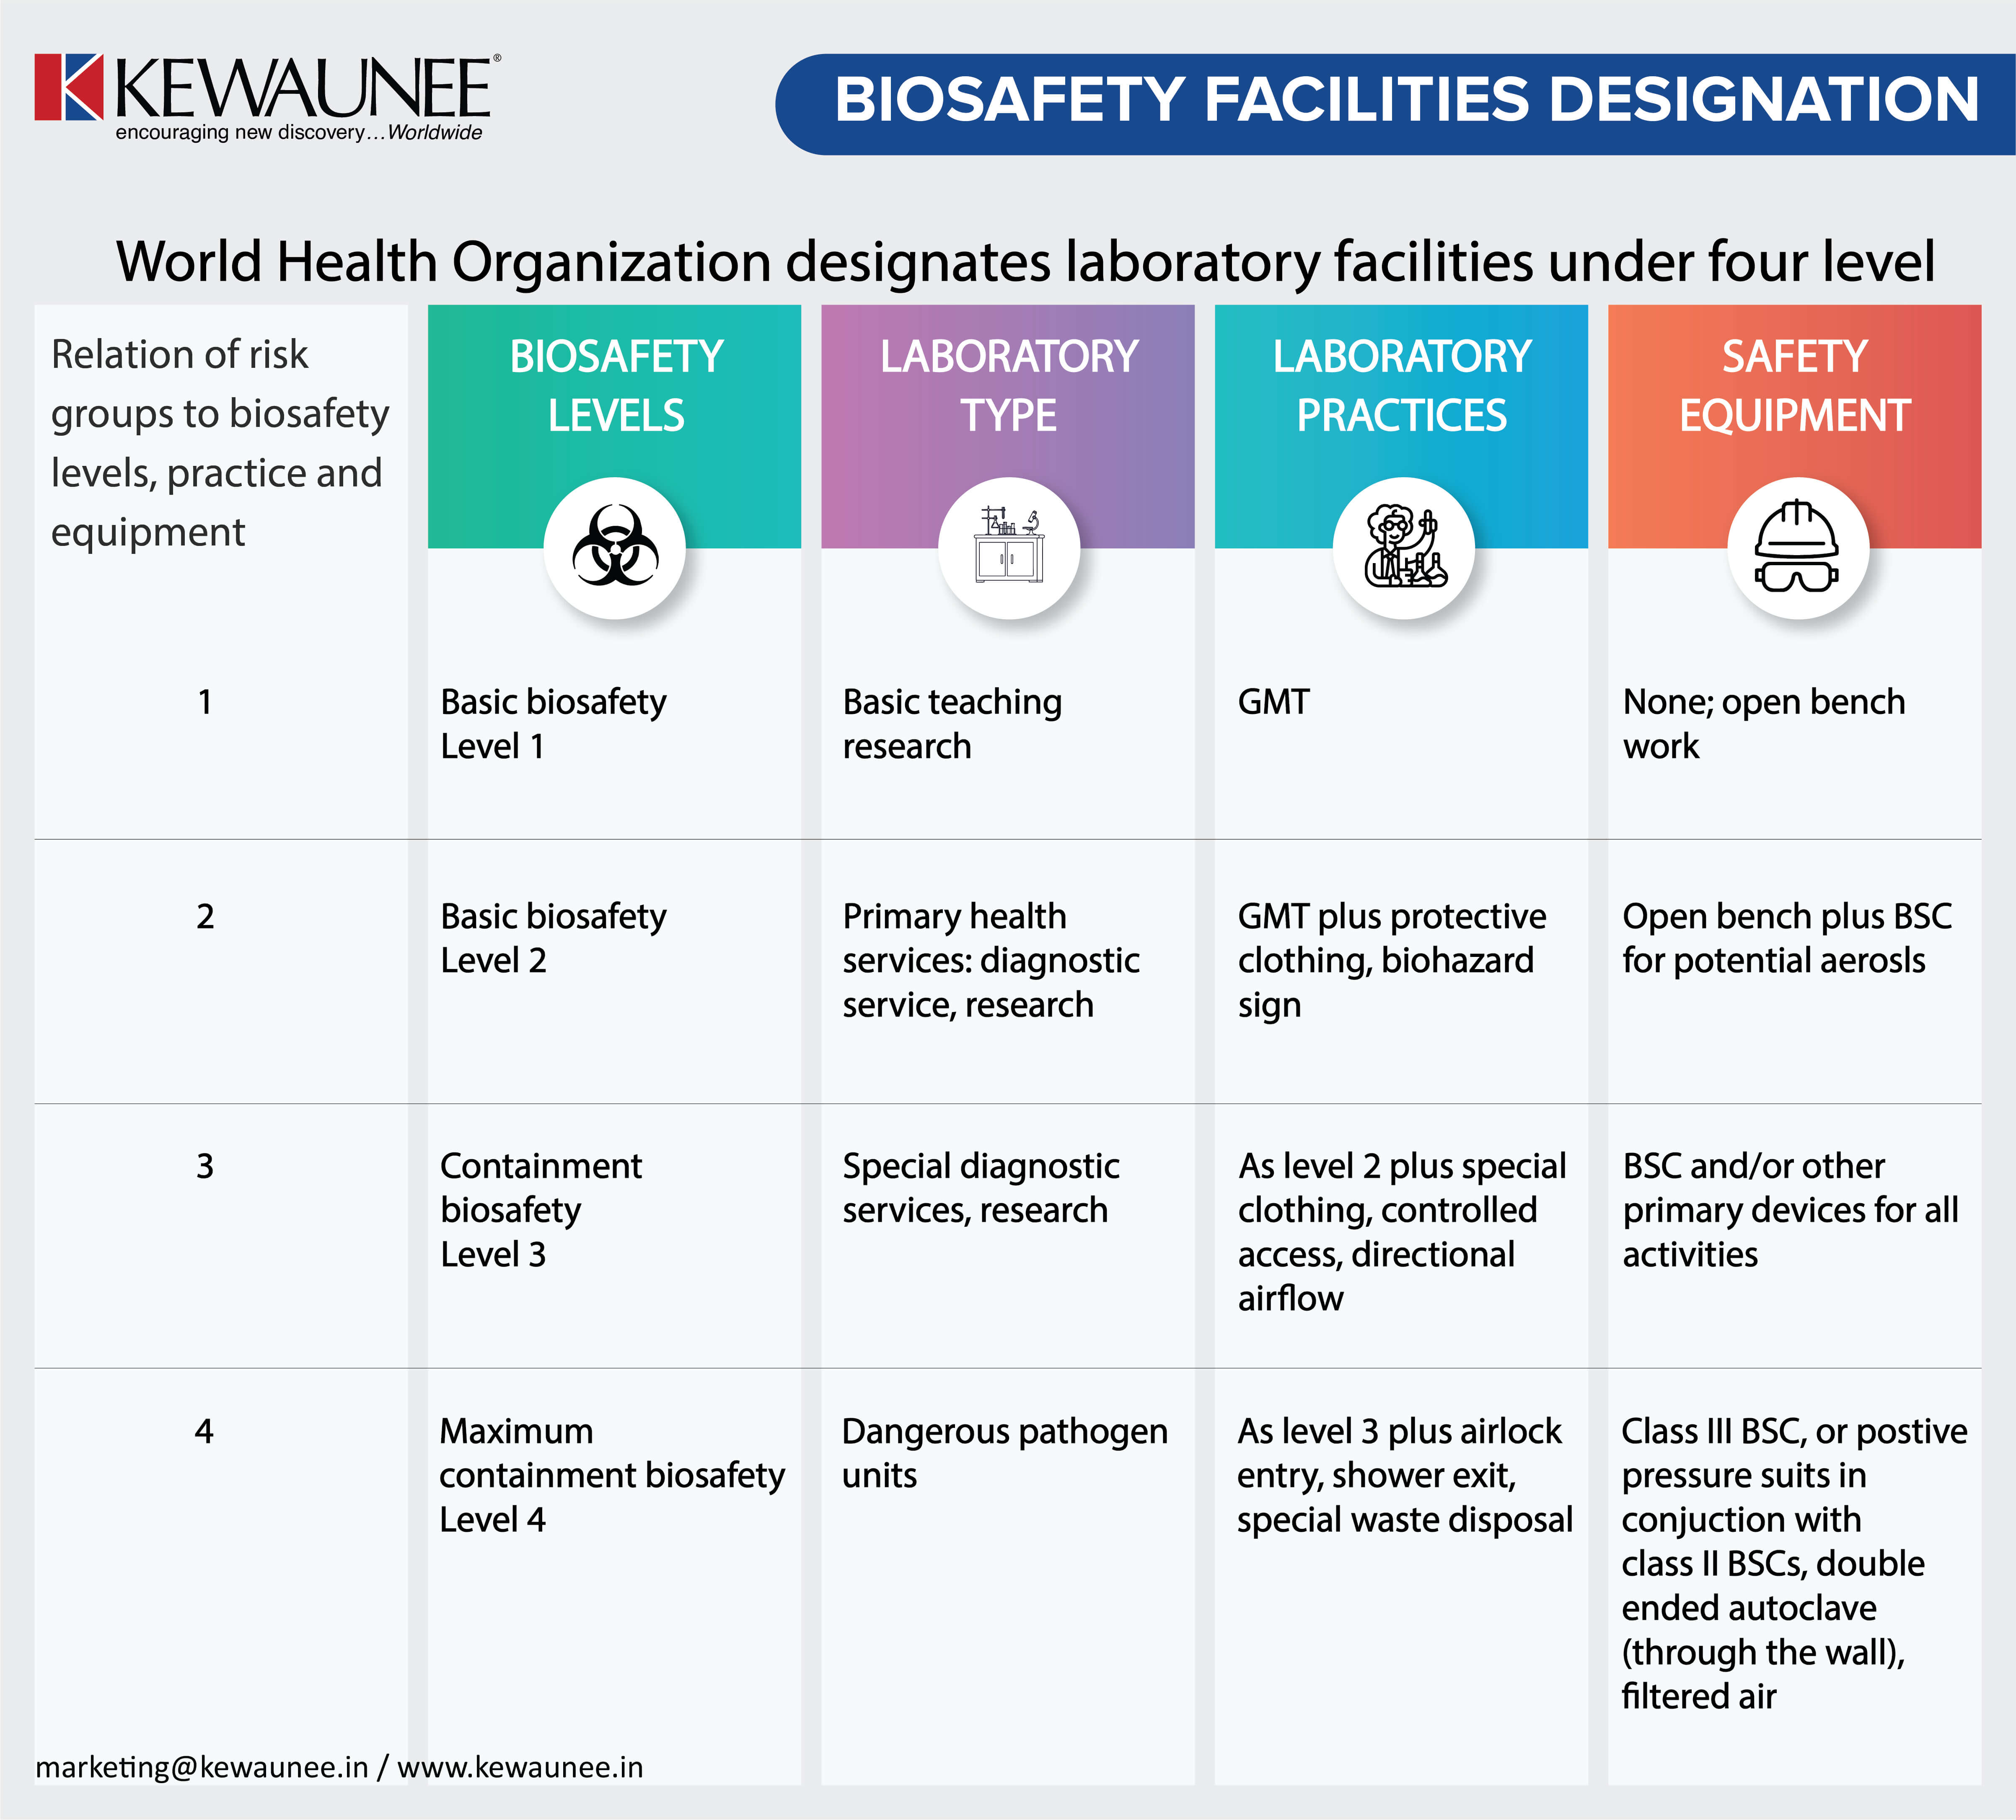 Biosafety Levels 1, 2, 3 & 4: What's the Difference?